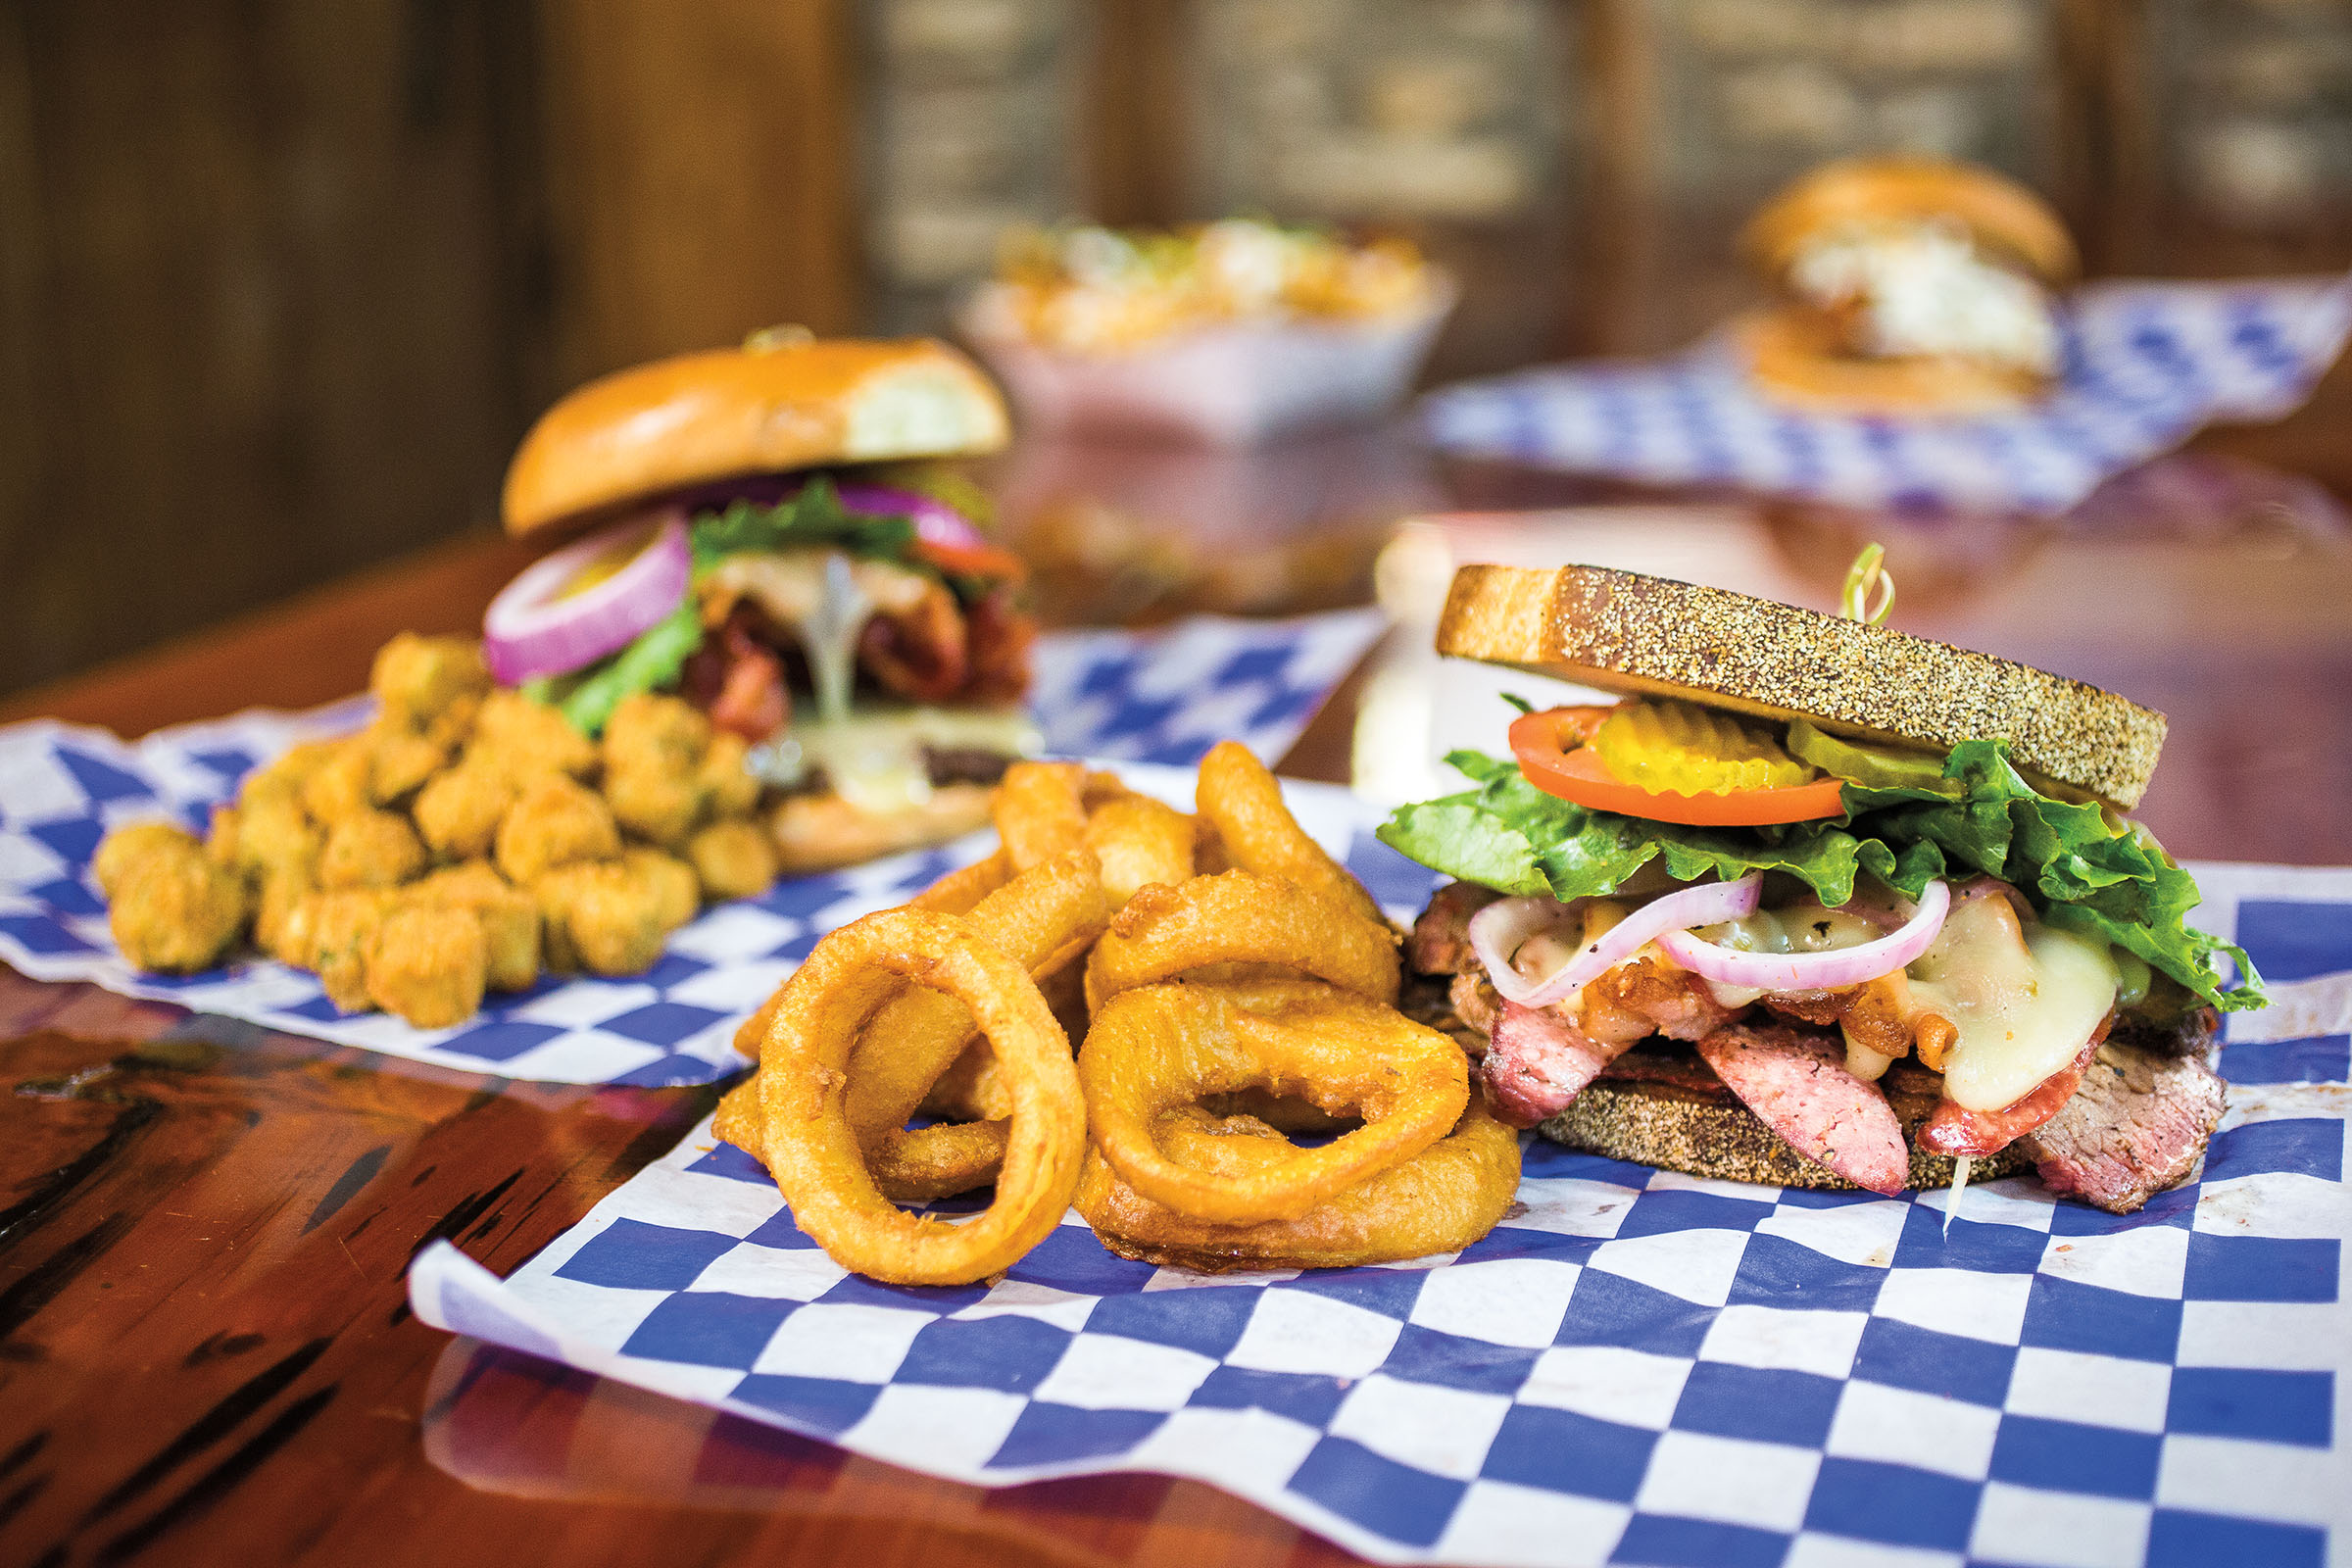 Sandwiches piled high with meat and cheese alongside fried sides like onion rings served on blue checkered paper